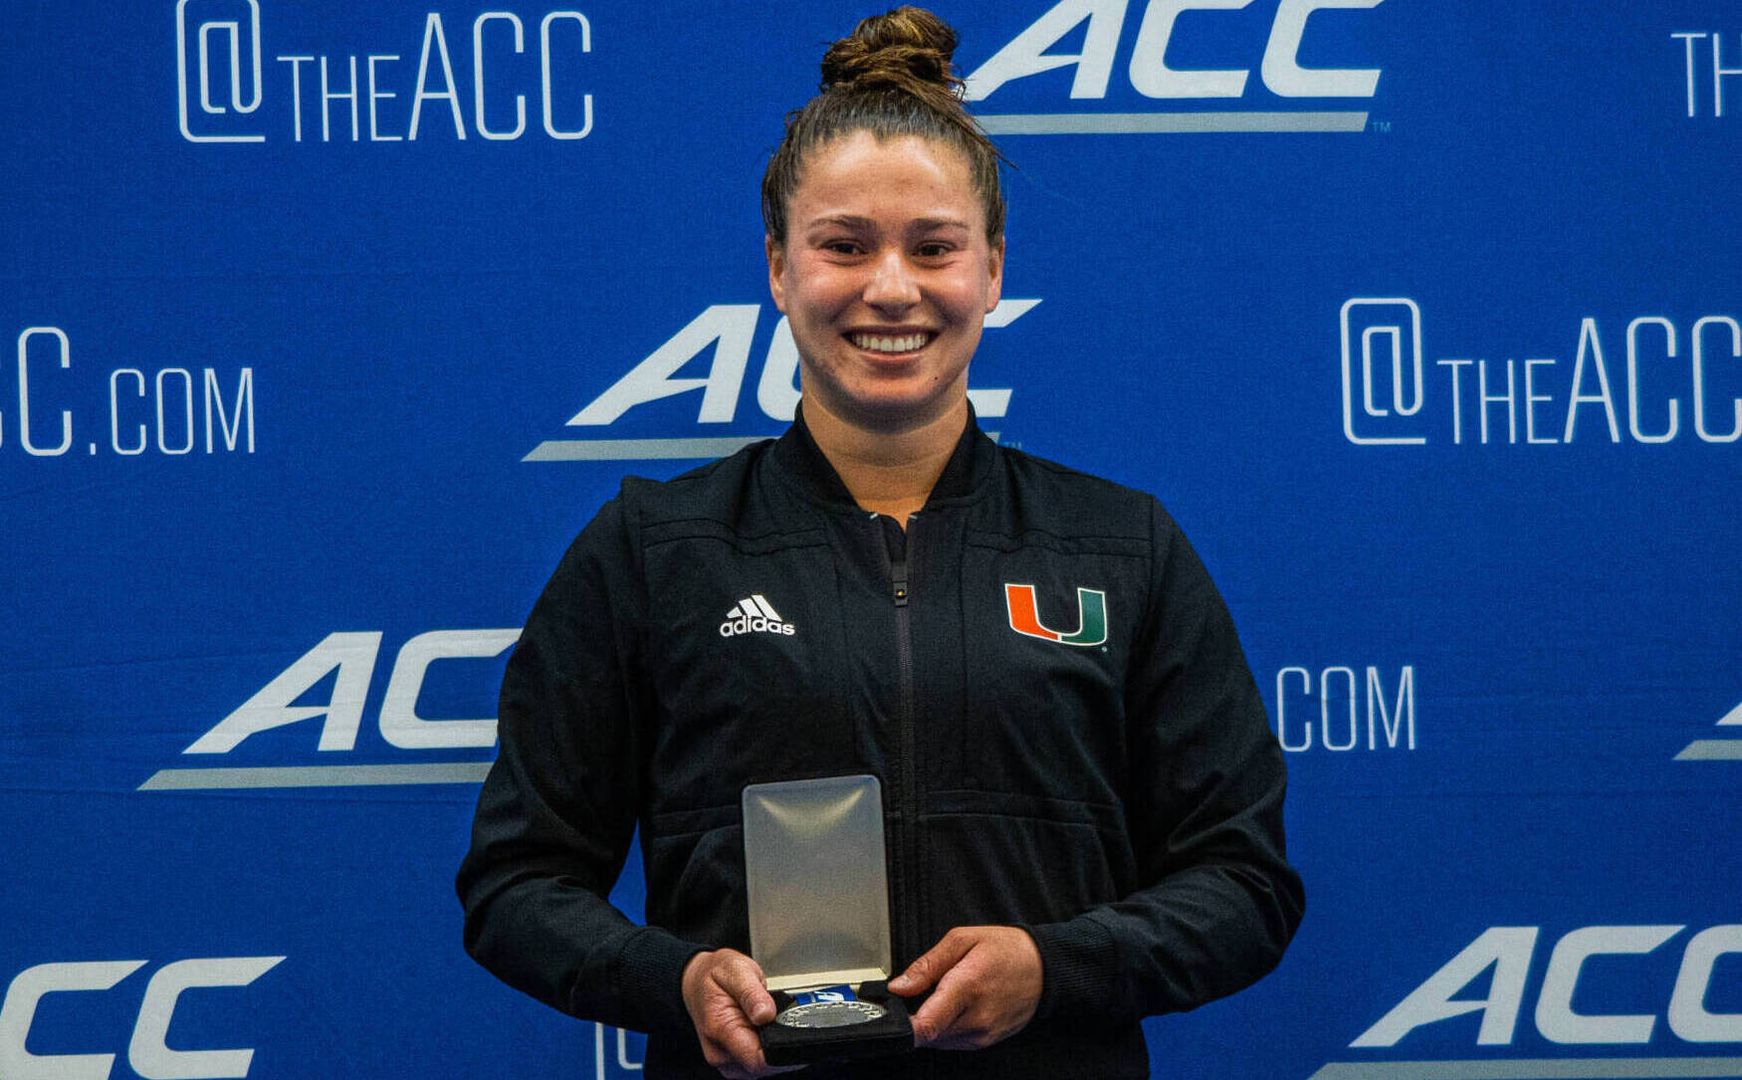 Vallée Wins Silver on Day 2 of ACC Championships